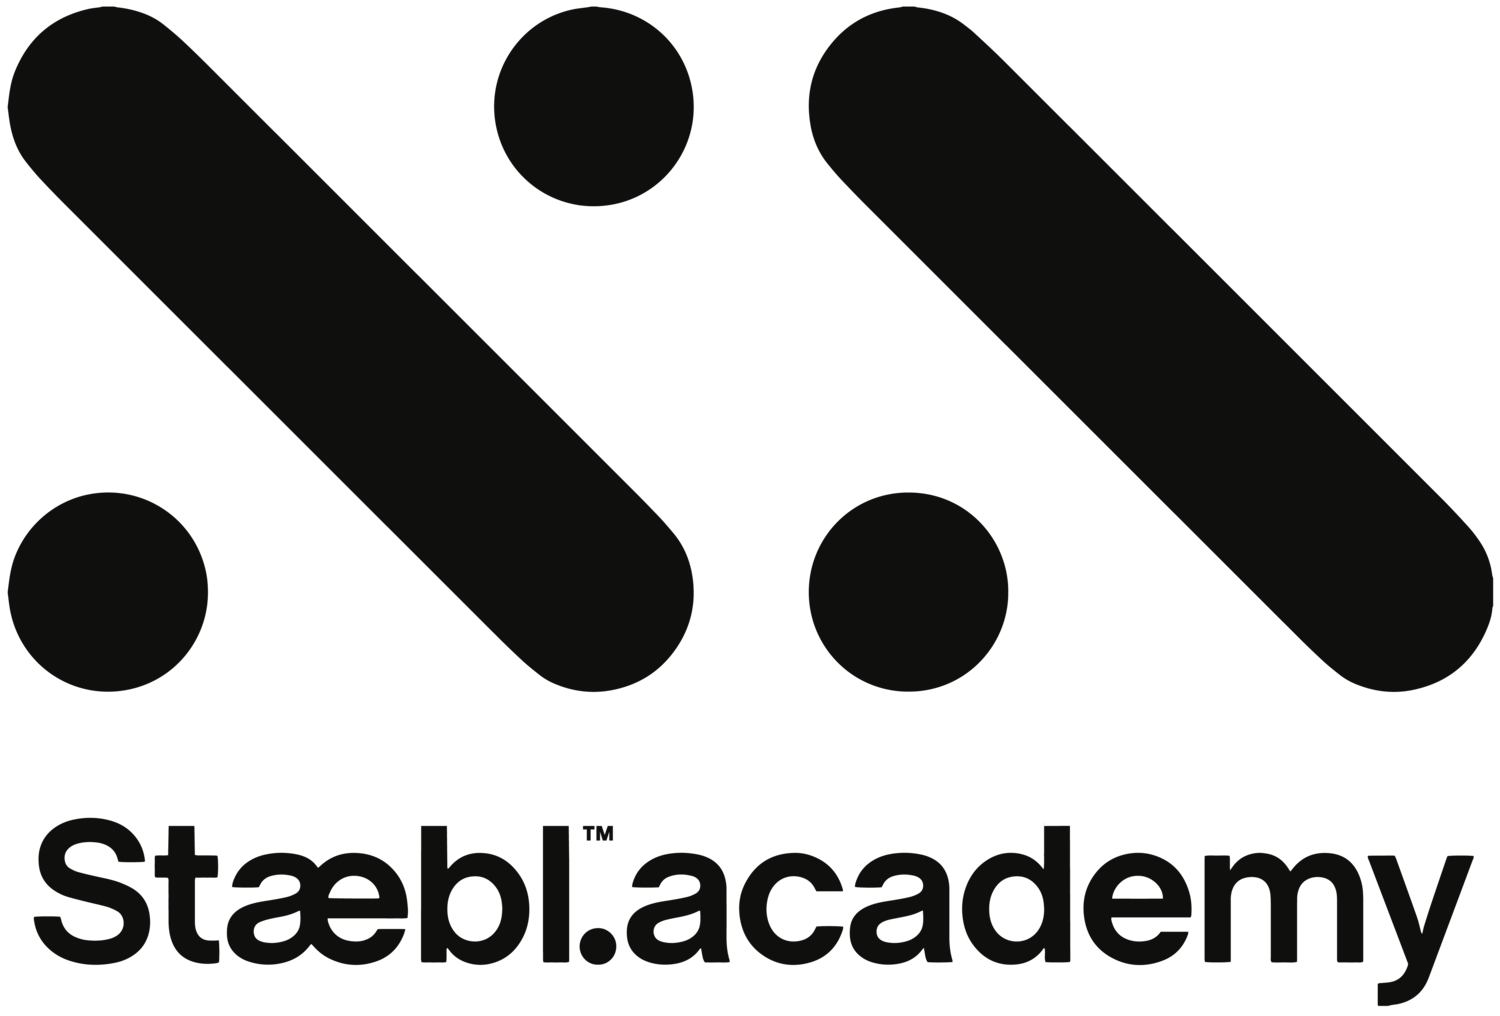 Staebl Academy - Mobility Access Design Library